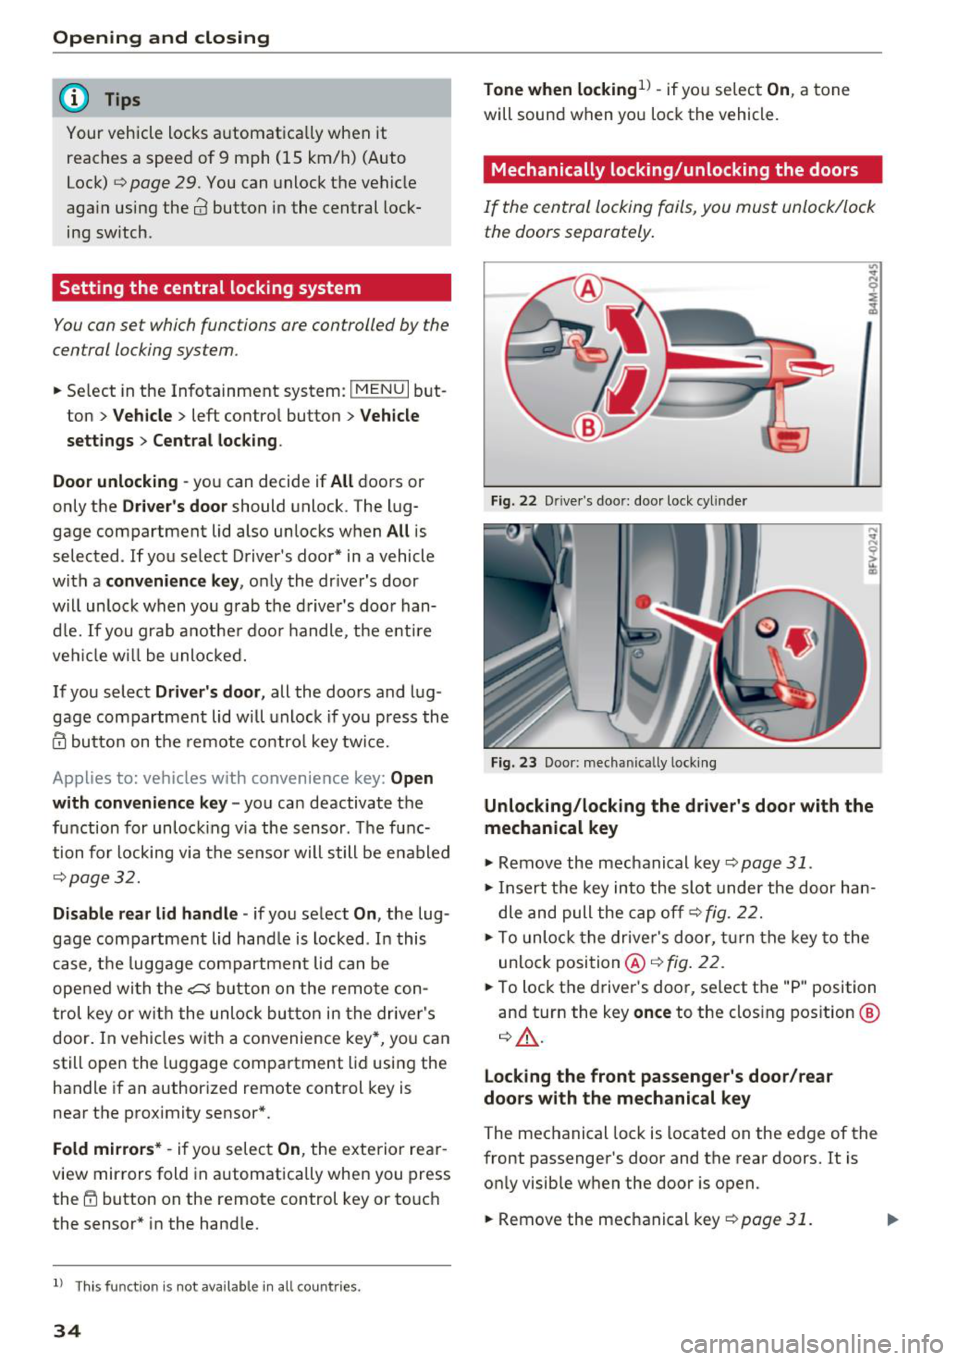 AUDI Q7 2018  Owner´s Manual Opening  and  closing 
@ Tips 
Your vehicle  locks  automat ica lly when  it 
reac hes  a  spee d of  9  m ph  (15  km/ h)  (Aut o 
Loc k) 
¢ page  29. You can  unlock  the  vehicle 
aga in  us ing  